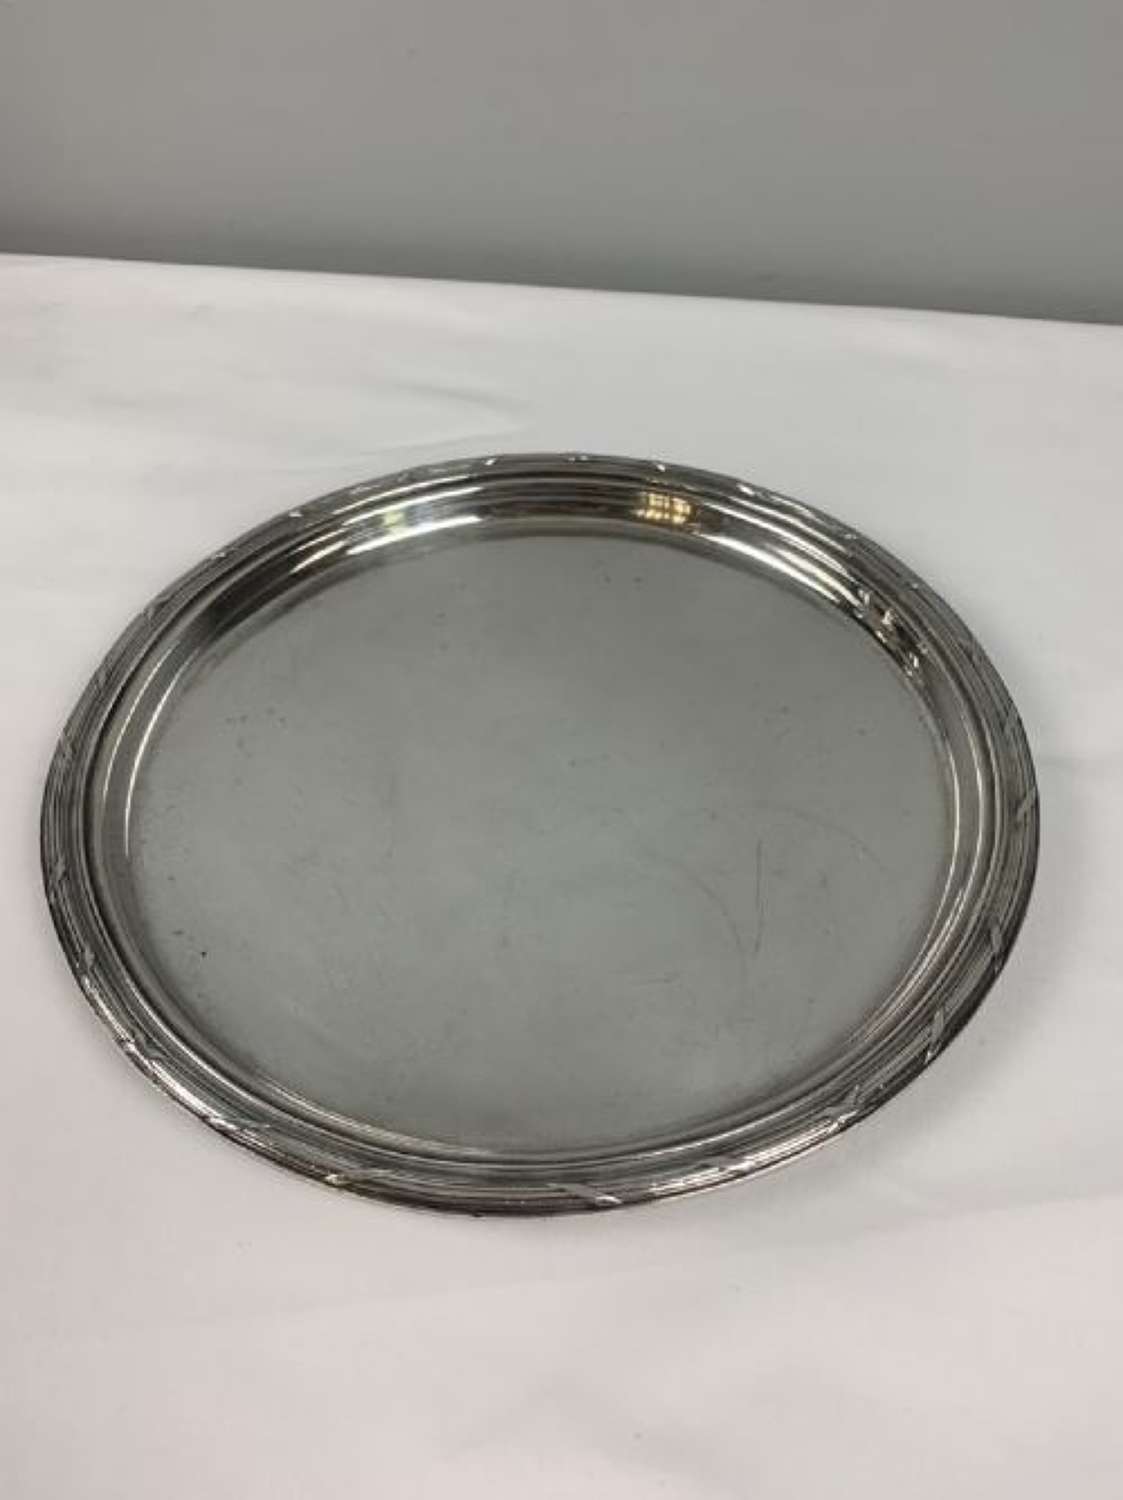 Goldsmiths London Silver Plated Drinks Tray